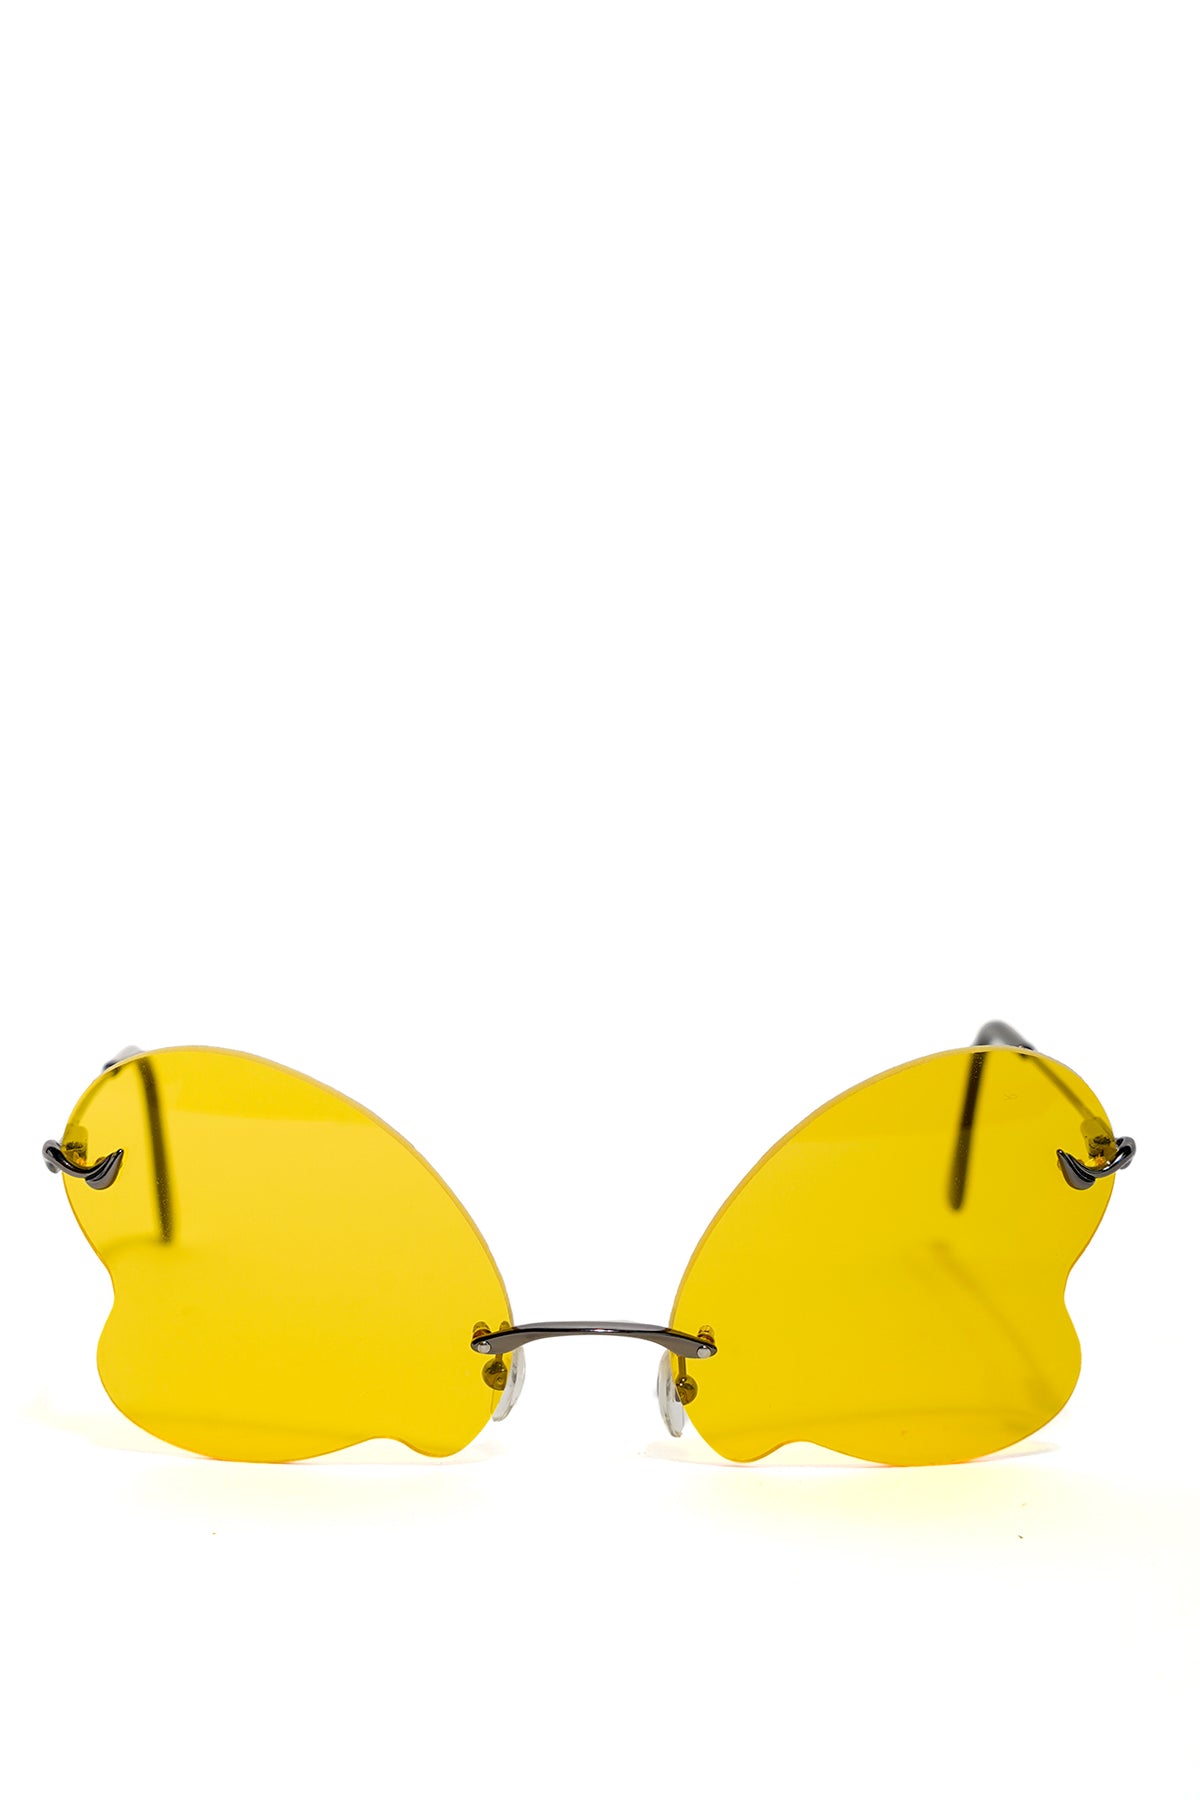 YELLOW BUTTERFLY SUNGLASSES